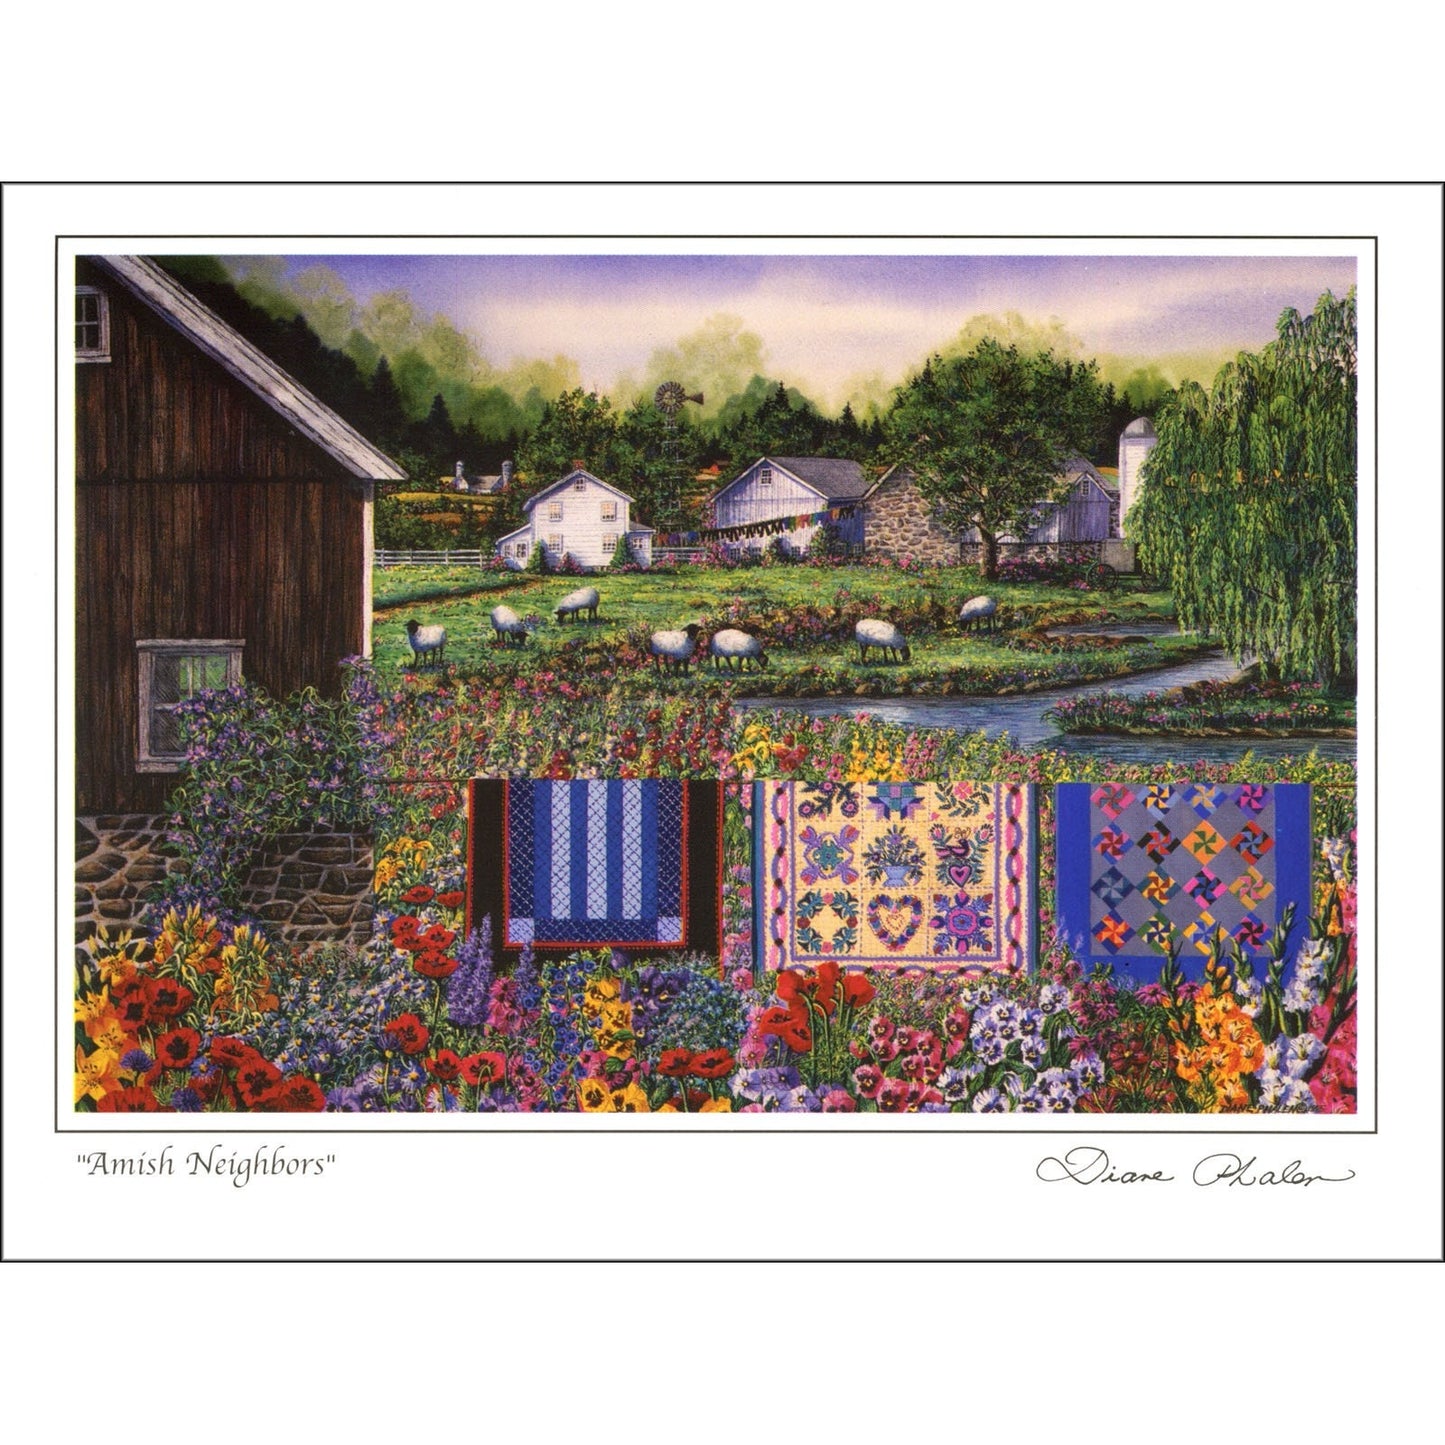 Quilt Themed 6 Note Card Set of Amish Quilt Scenes 3 different prints by Diane Phalen Watercolors